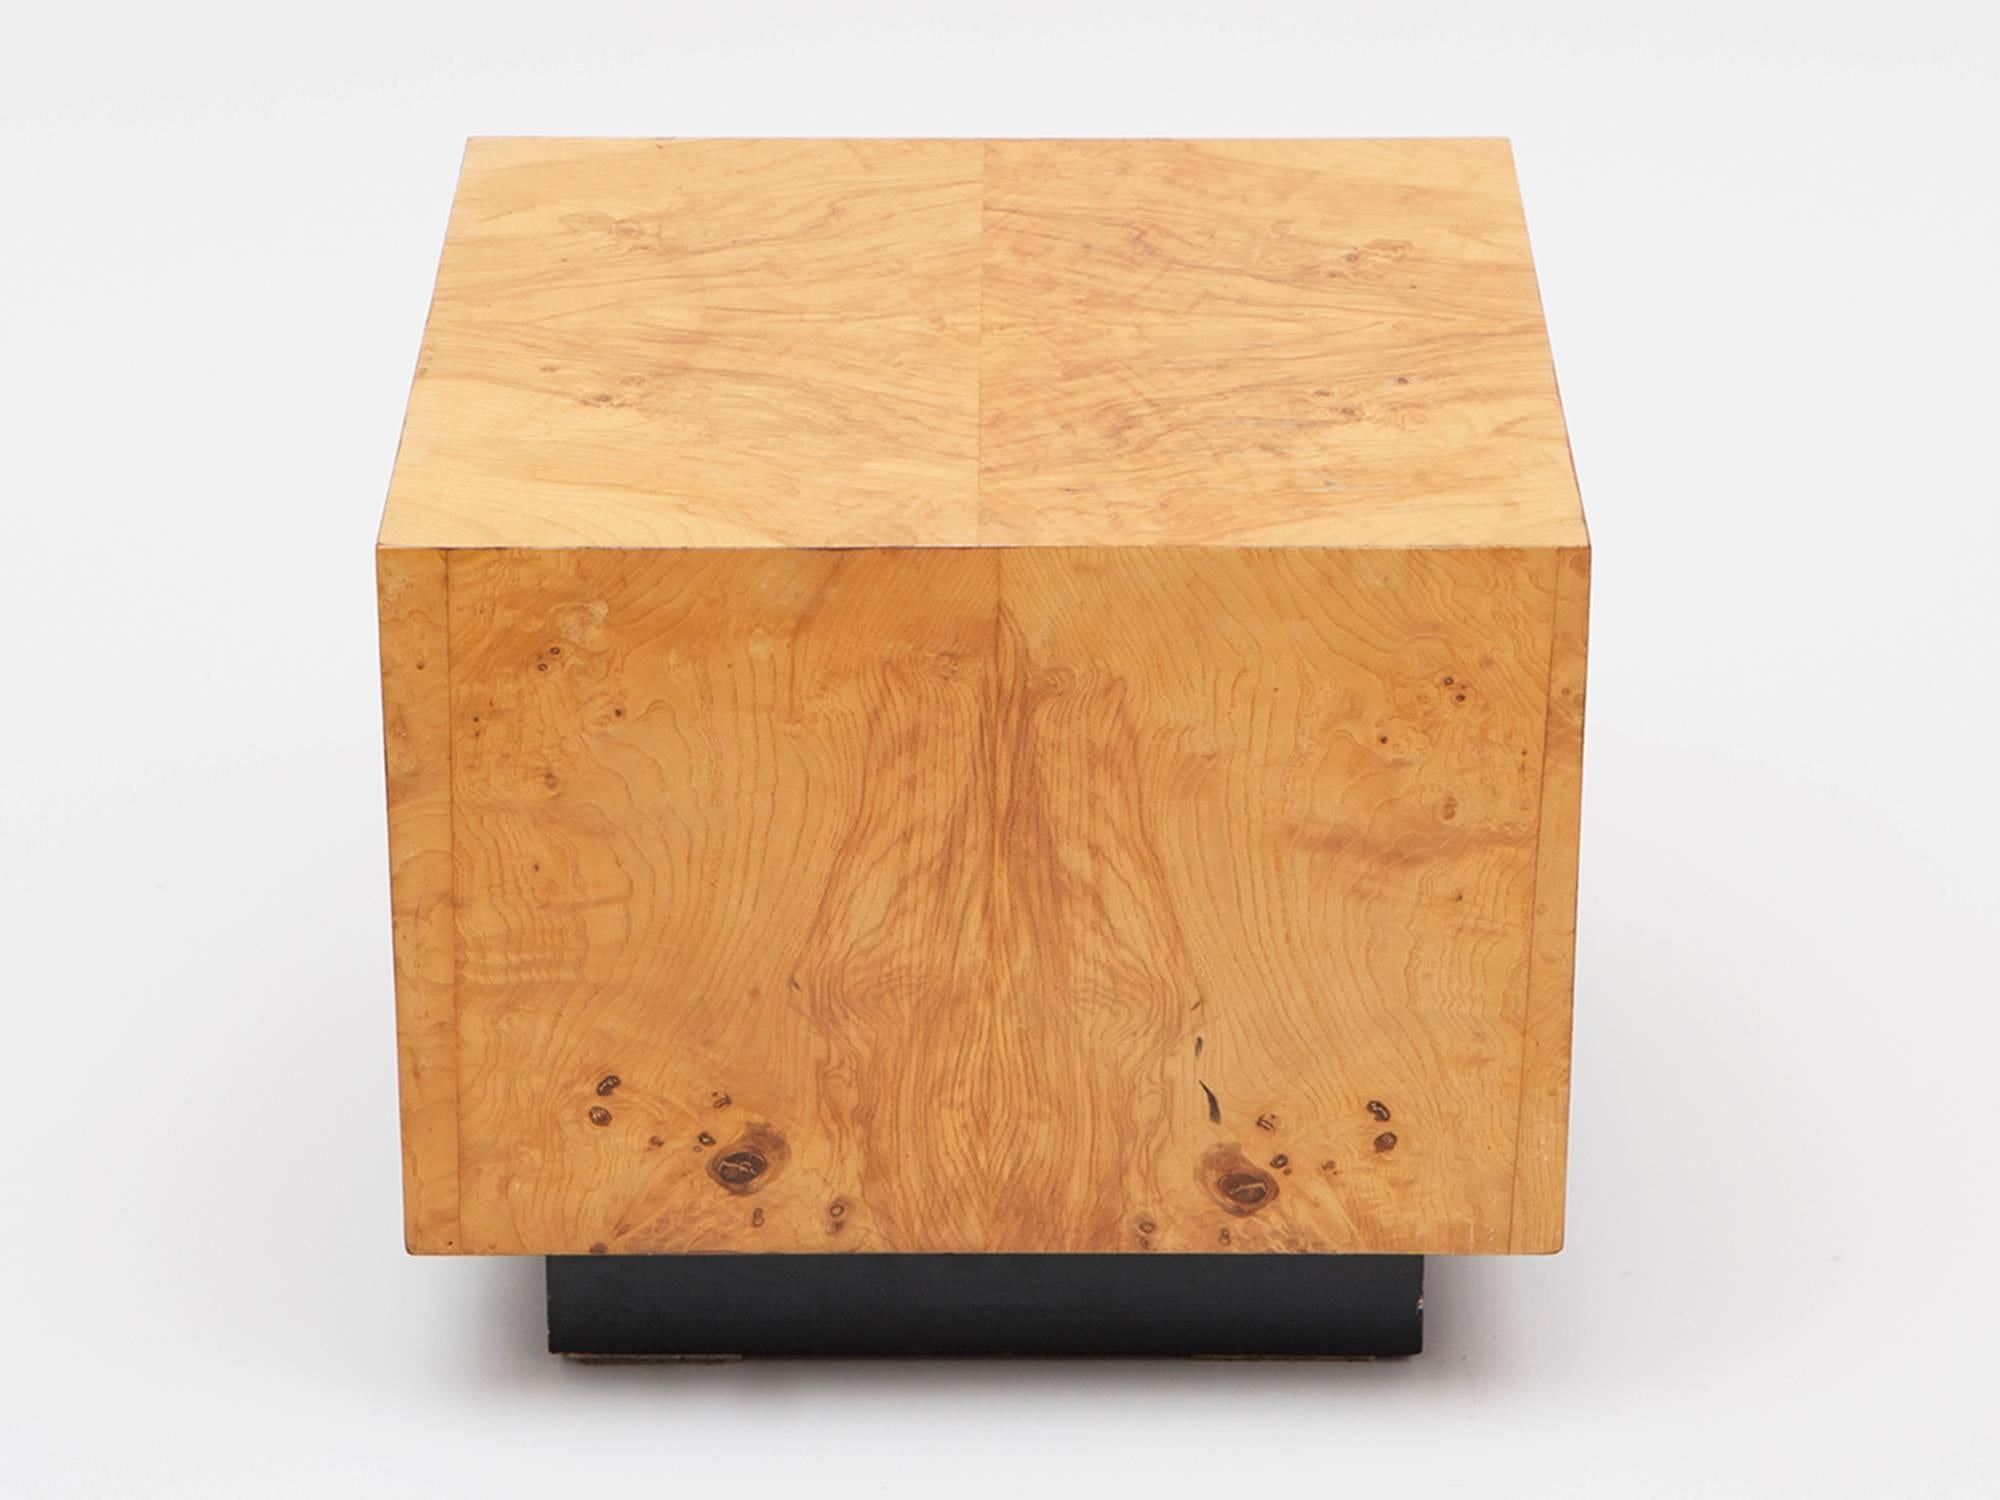 Pair of beautiful Milo Baughman cube bedside tables made of burl olivewood and with black lacquered bases. Wonderful as bedside tables, side tables, pedestals or coffee tables.